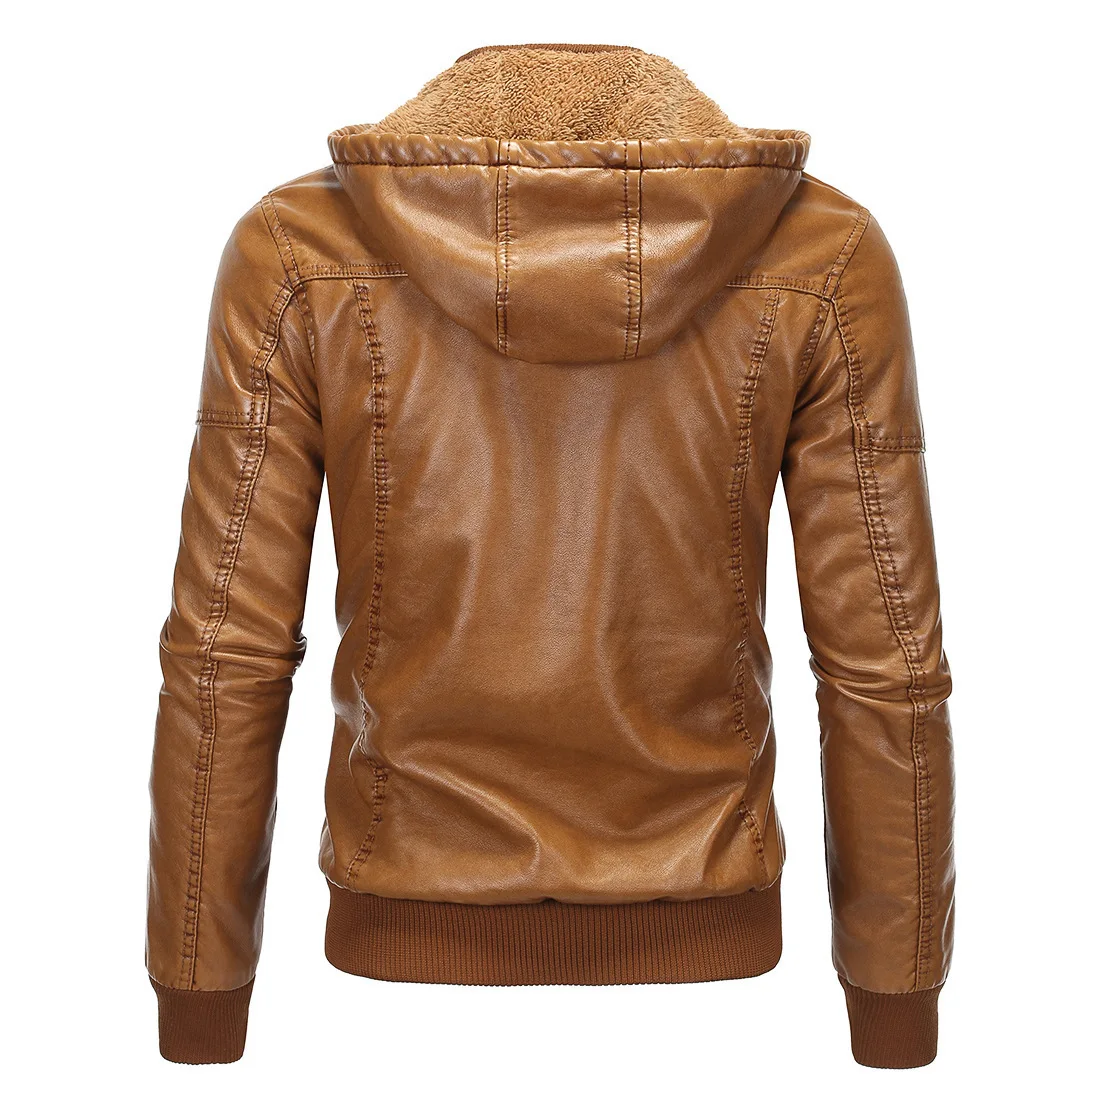 Men's Lapel Motorcycle Leather Jacket Multi-Pocket Casual Fit Leather Jacket Slim Fit Full Zip Long-Sleeve Leather Coat